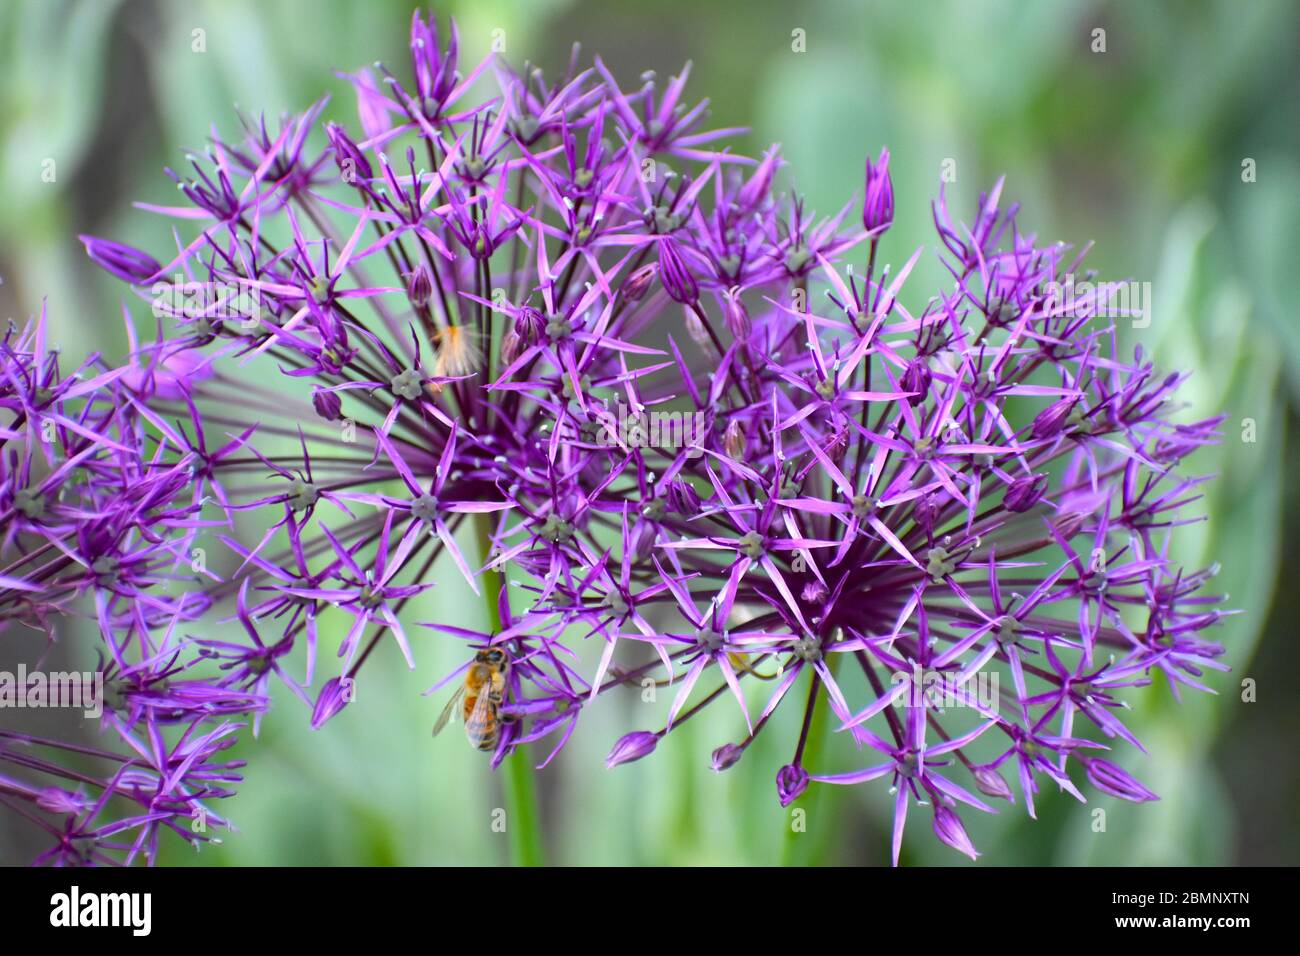 Allium blooms Ornamental onion garden plant grown for its flowers in purple shades If you wish to add it to the patio you should start bulbs in autumn Stock Photo